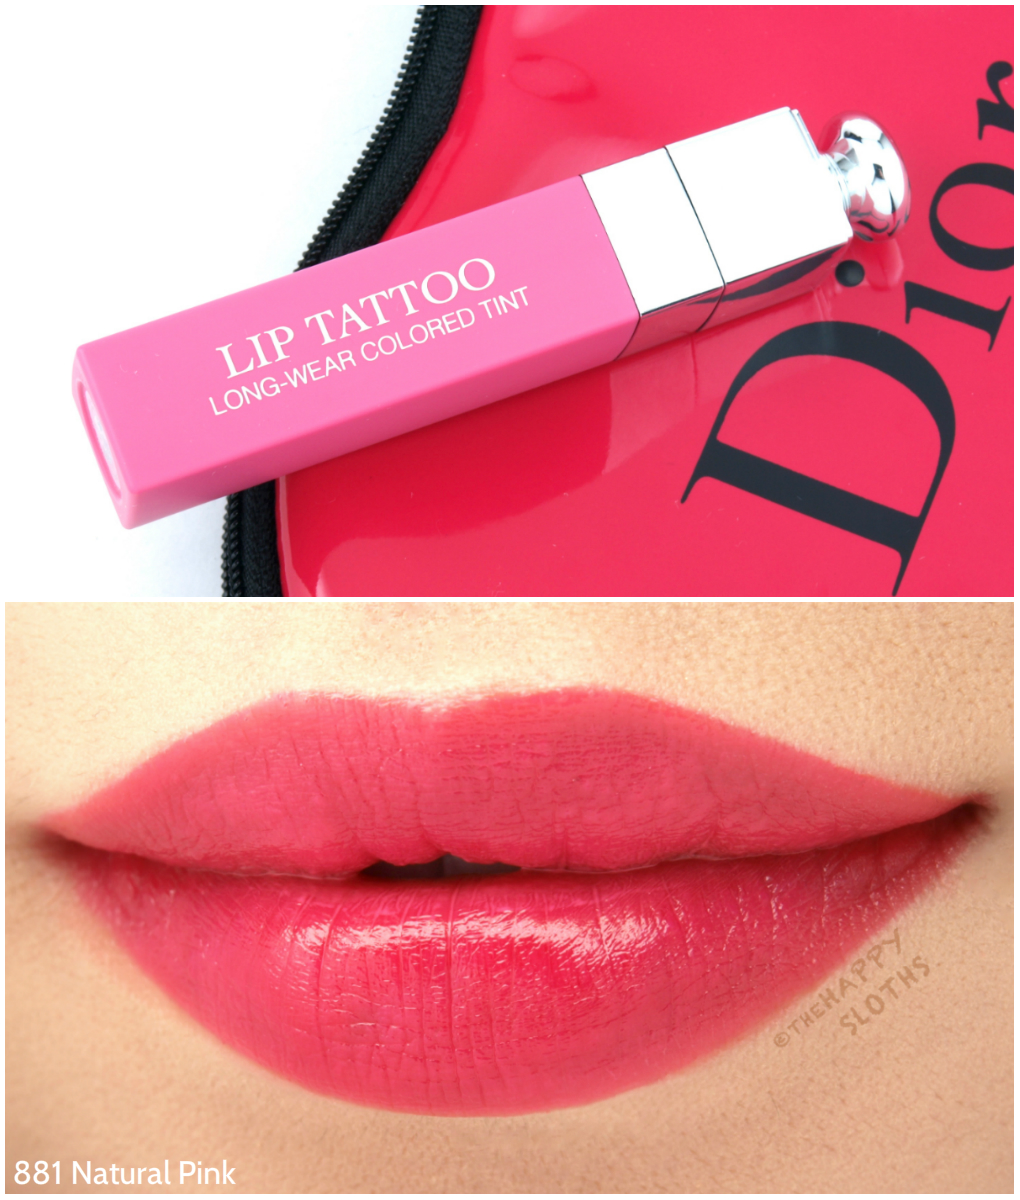 Dior Addict Lip Tattoo Long-Wear Colored Tint in "881 Natural Pink": Review and Swatches